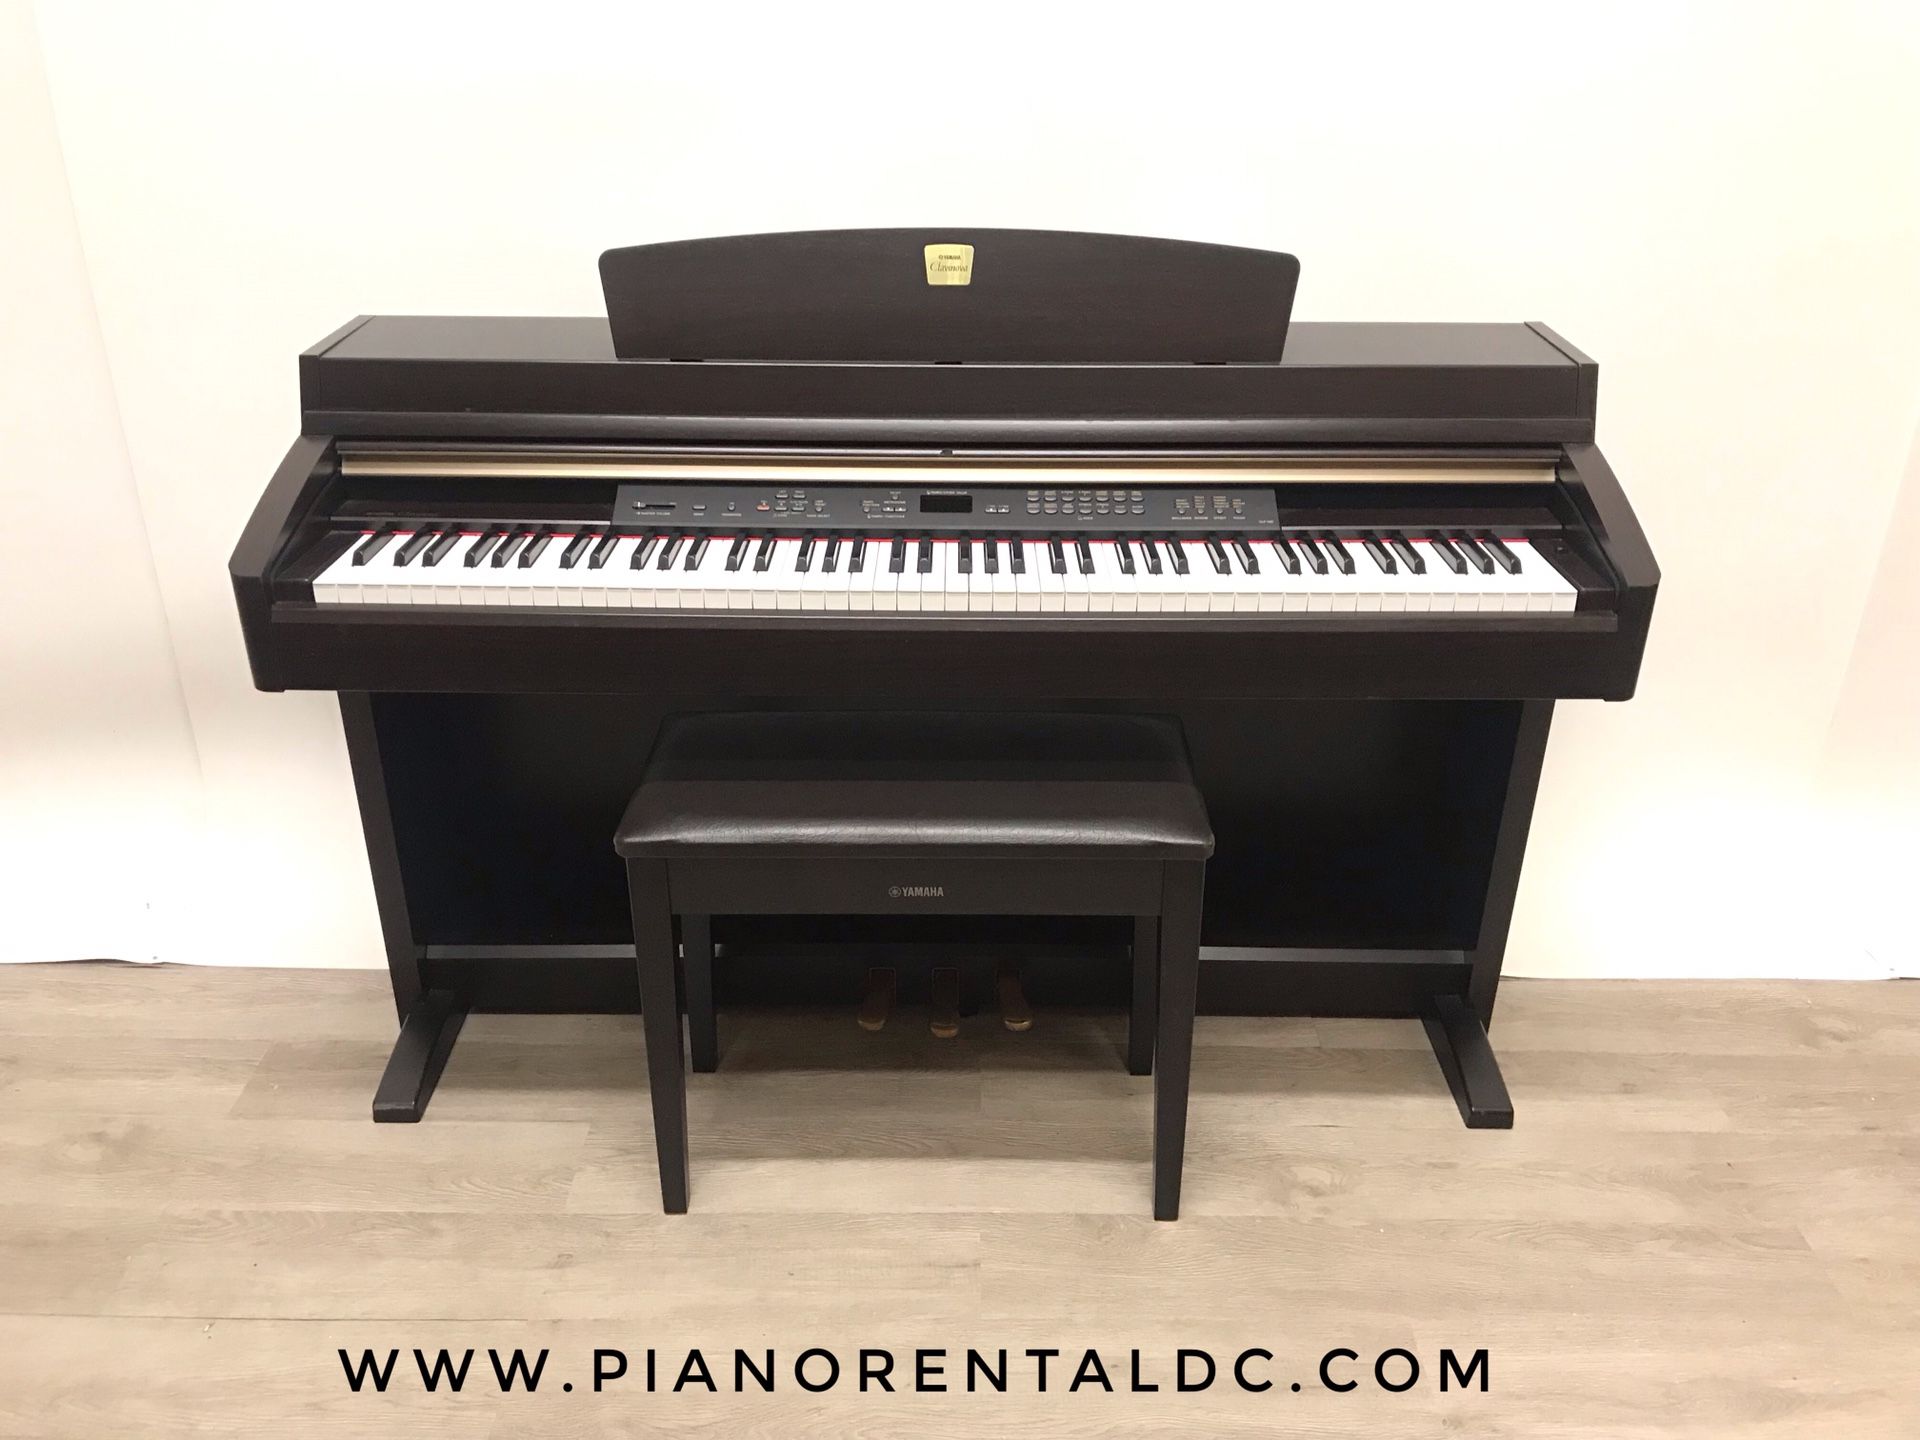 Rent a Digital Piano for your Home $69 per Month